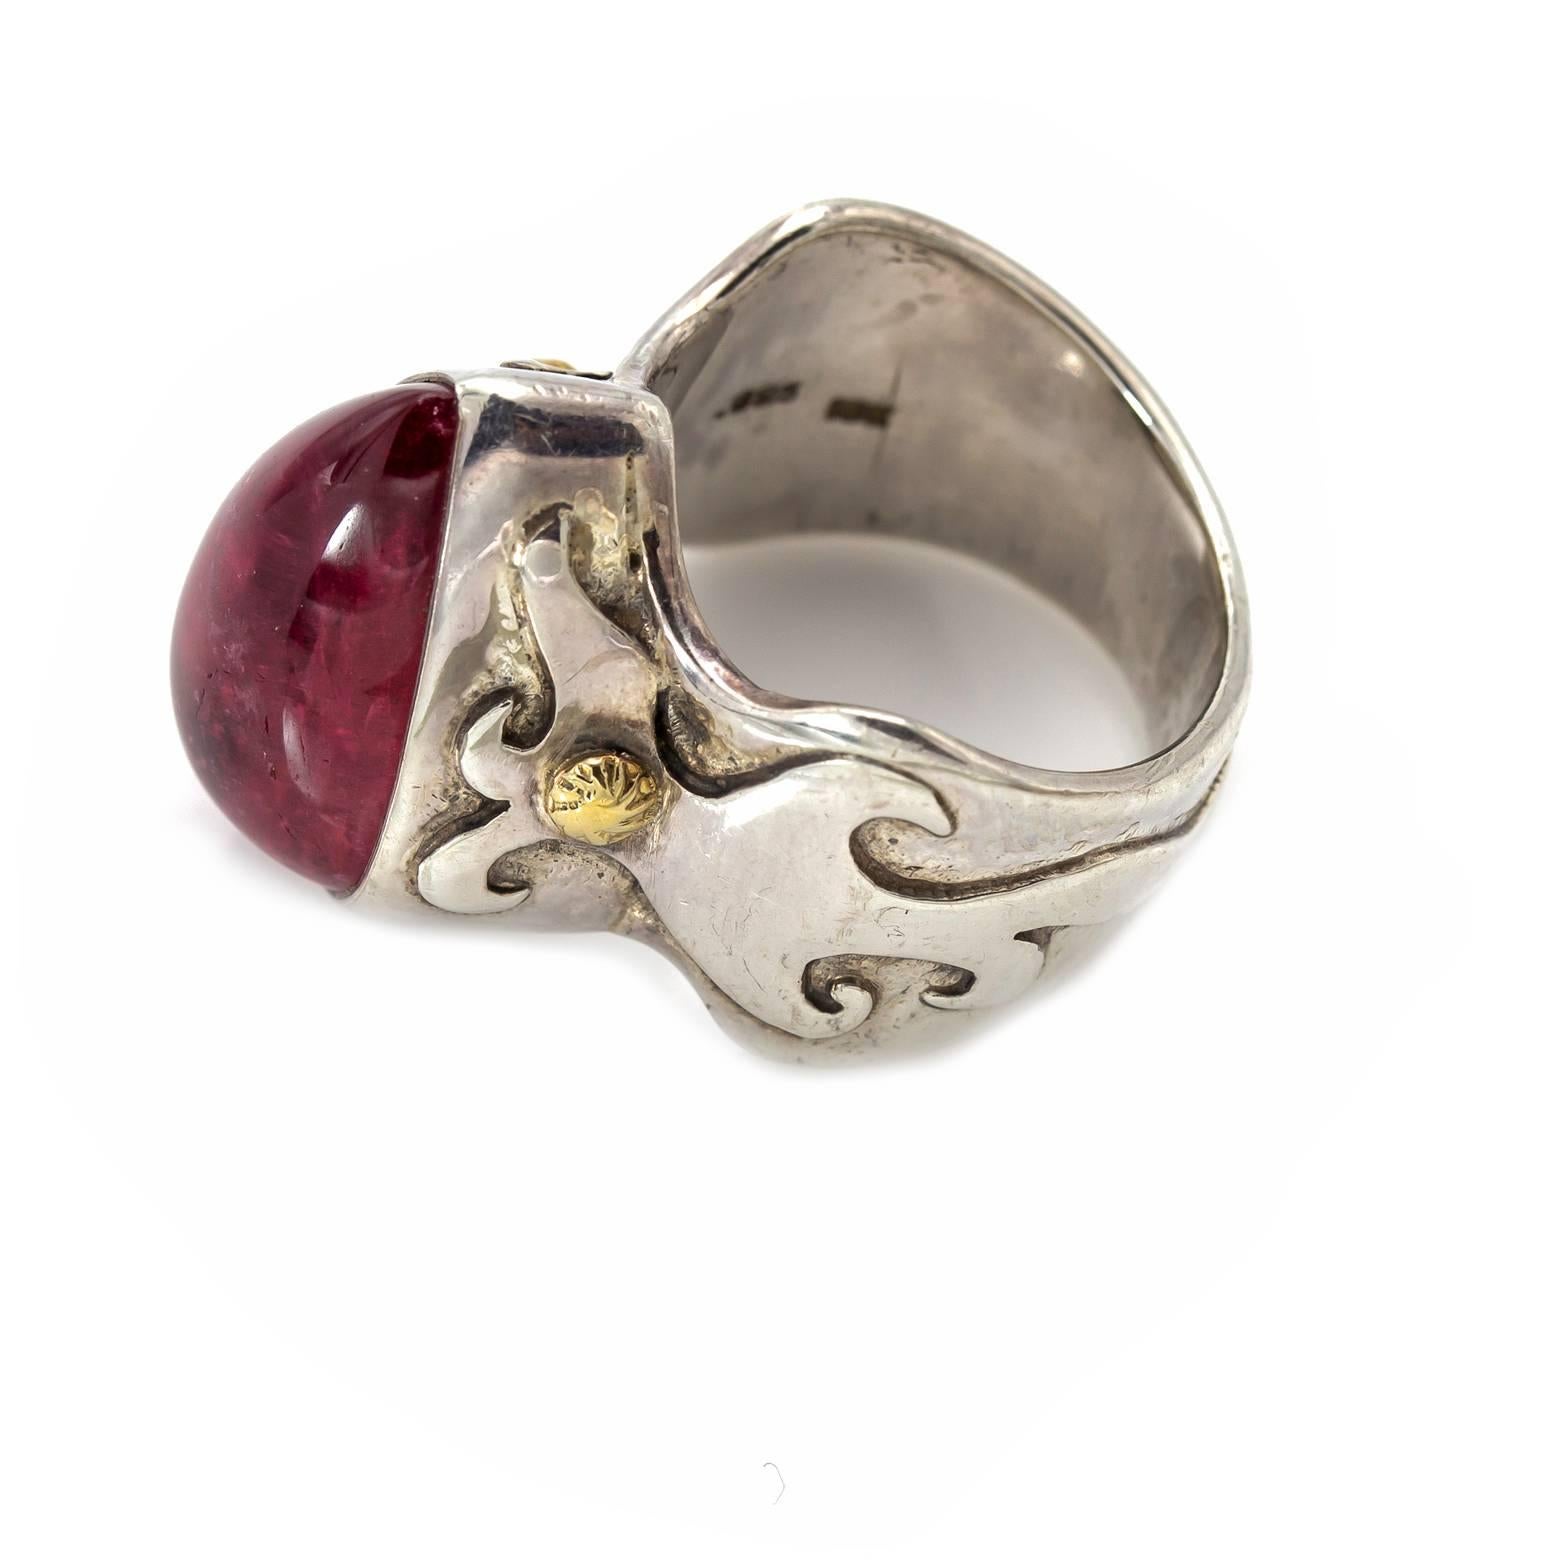 Large Tear Drop Pink Tourmaline Ring in Silver and Gold 1